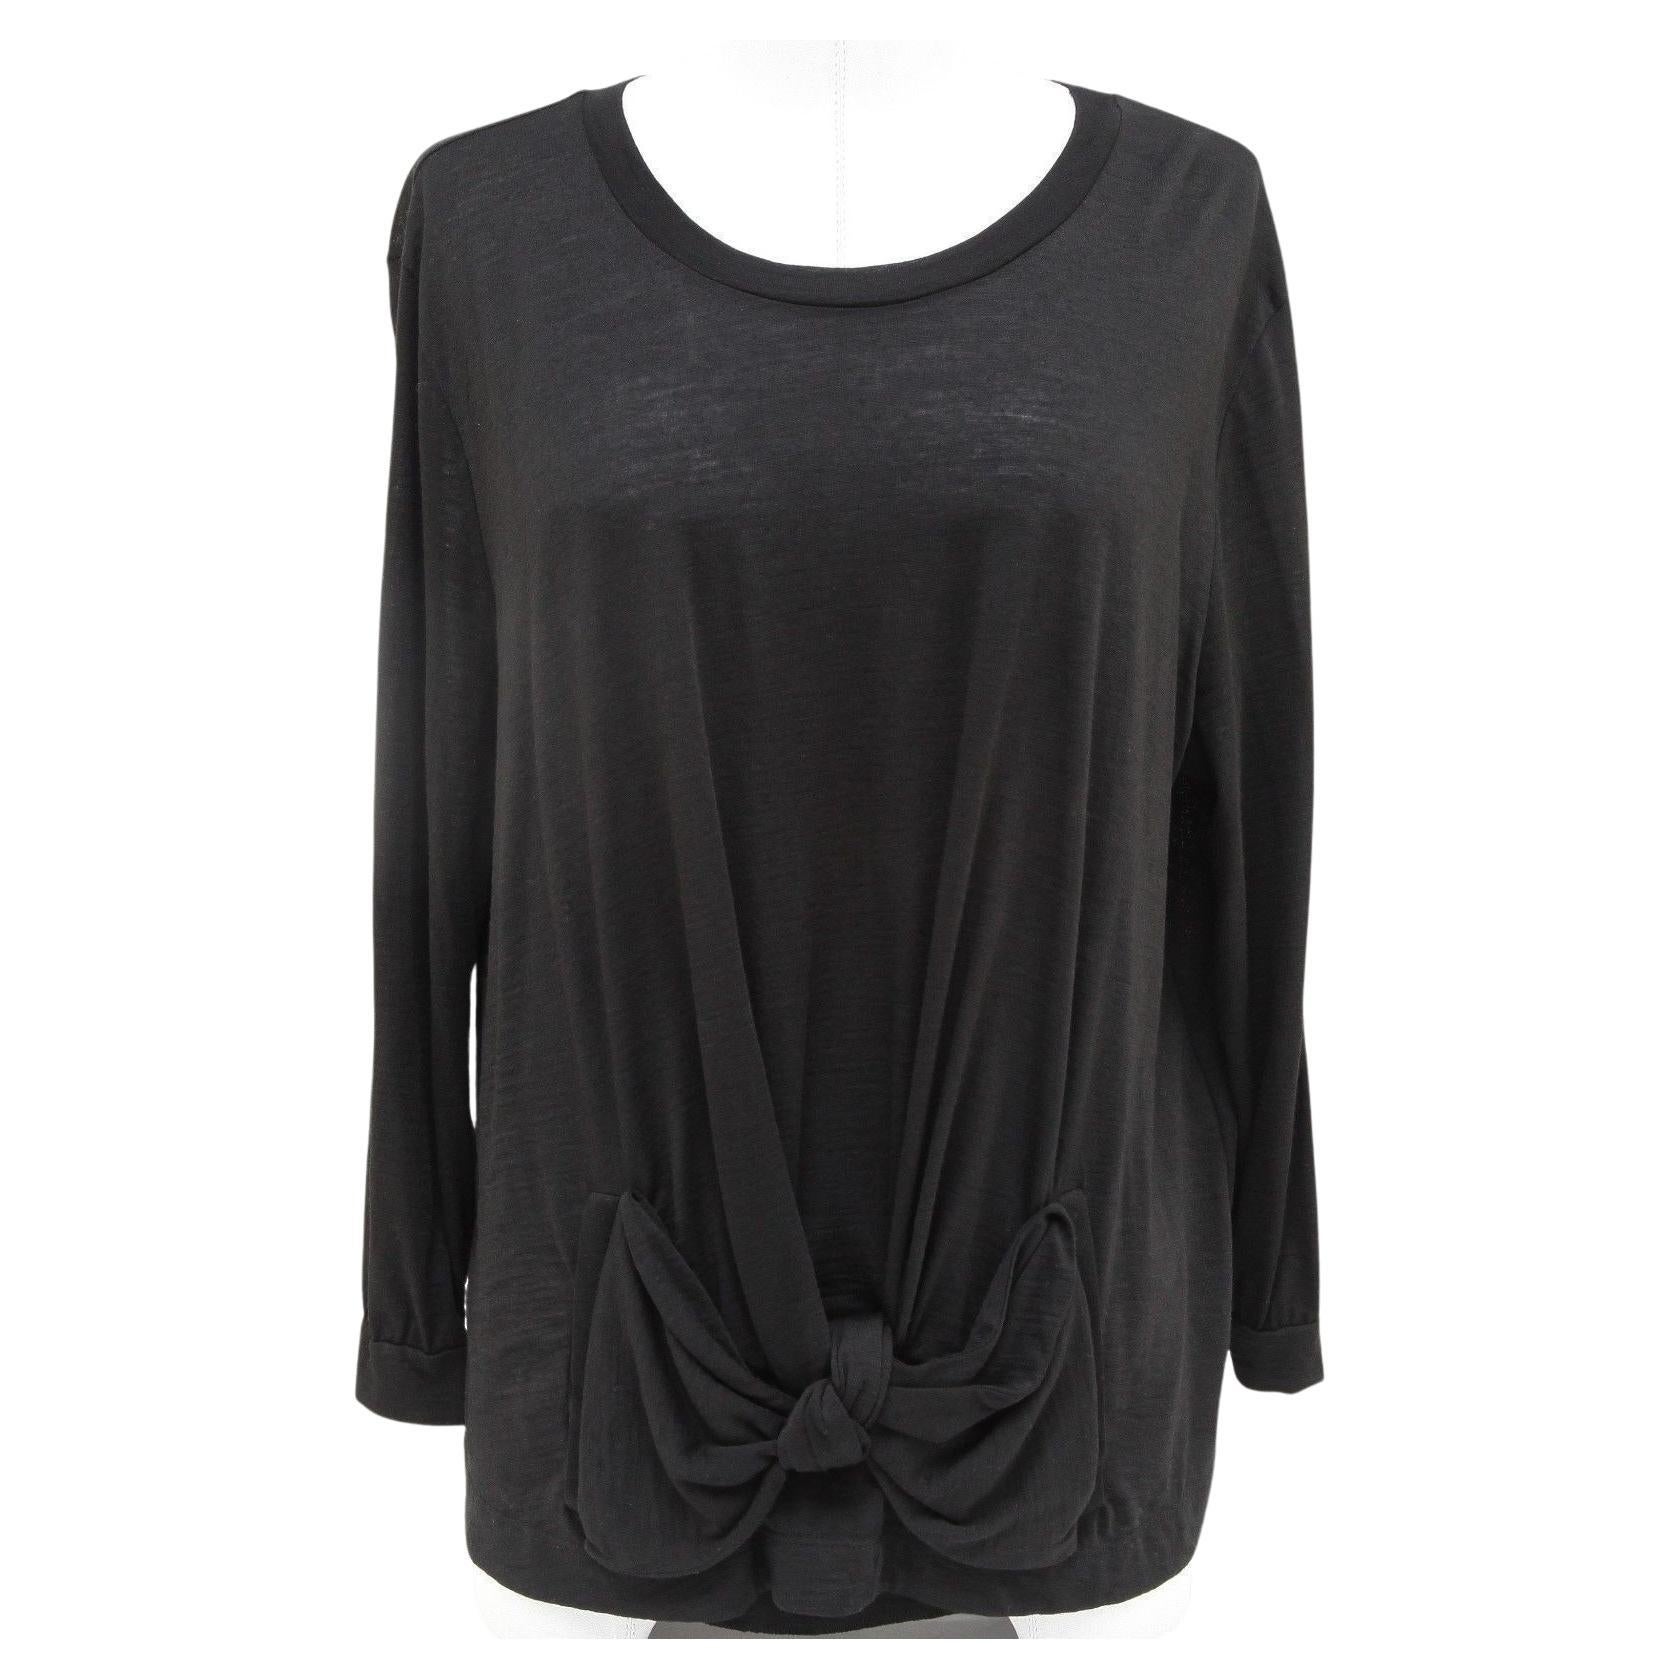 SEE BY CHLOE Sweater Knit Top Black 3/4 Length Sleeve Scoop Neck Sz F 42 US 10 For Sale